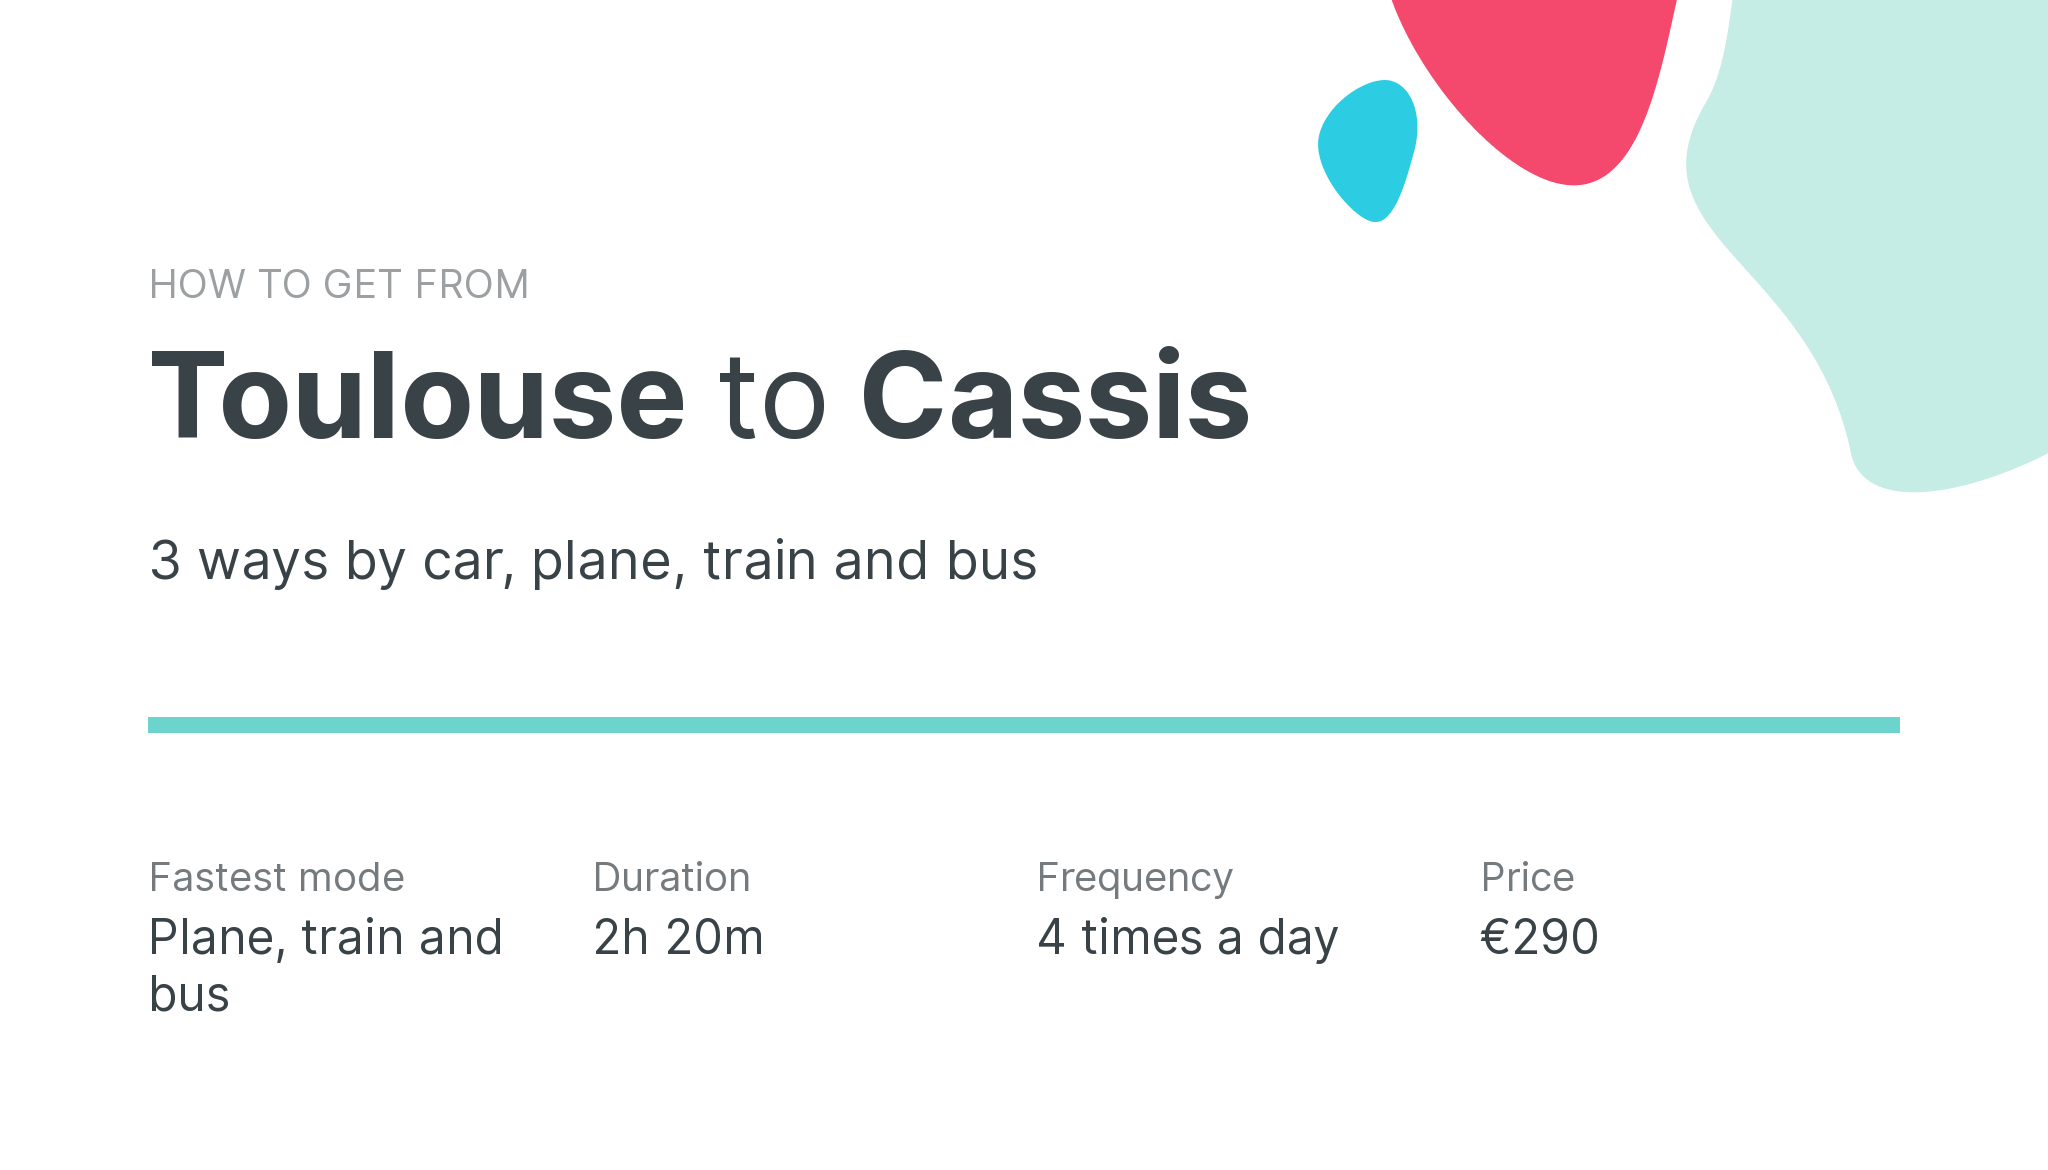 How do I get from Toulouse to Cassis